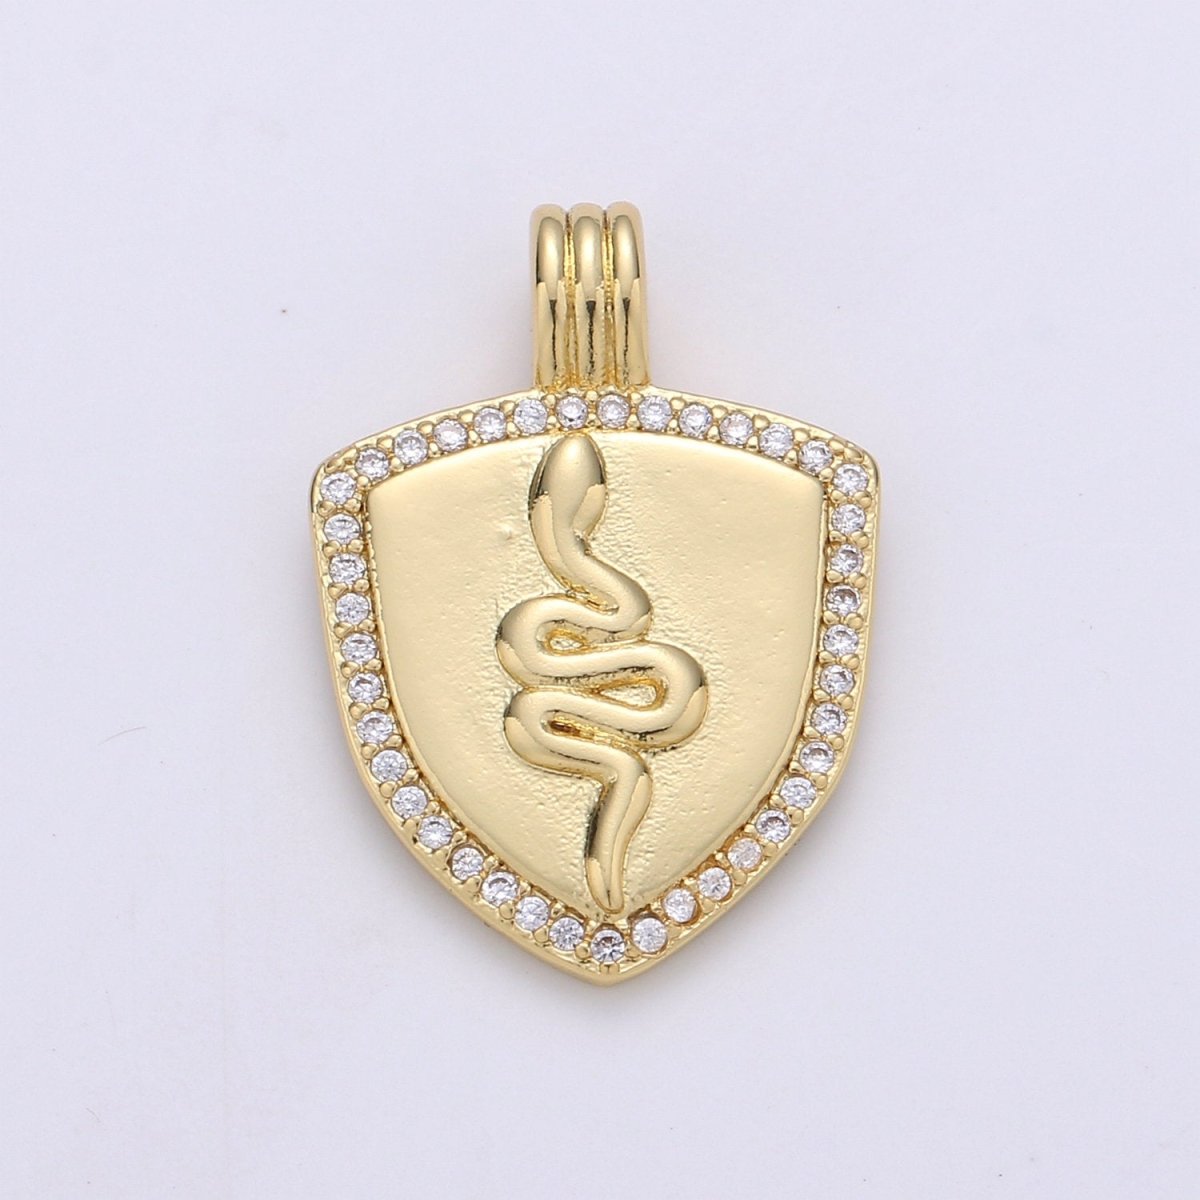 Dainty 14k Gold Filled Shield Charm, Cz Shield pendant, Micro Pave Snake Pendant Protection Jewelry Supply I-932 - DLUXCA